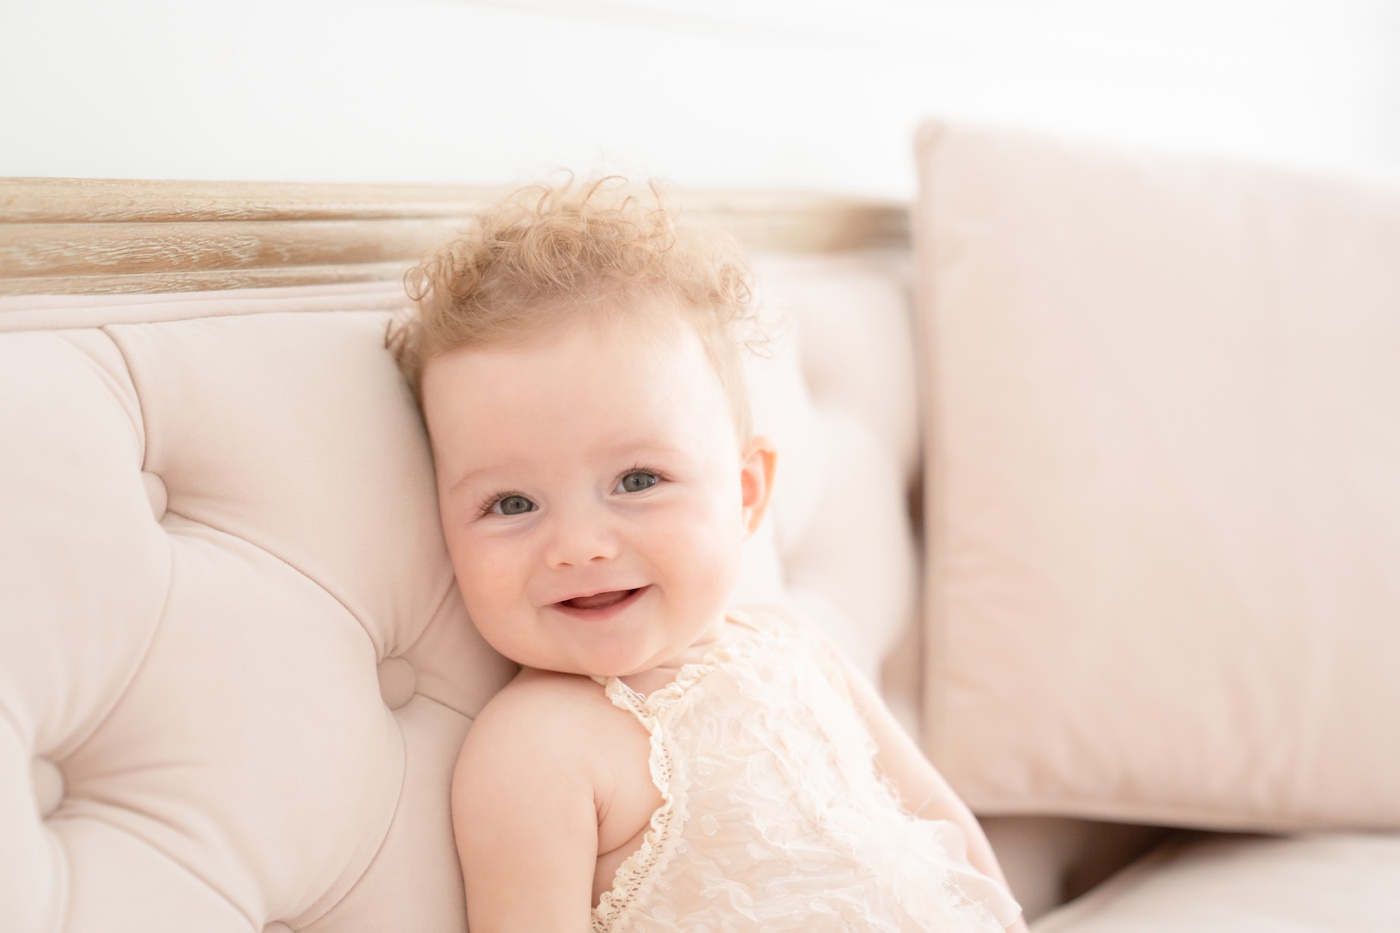 Baby girl sitting on a pink couch in an all white photo studio